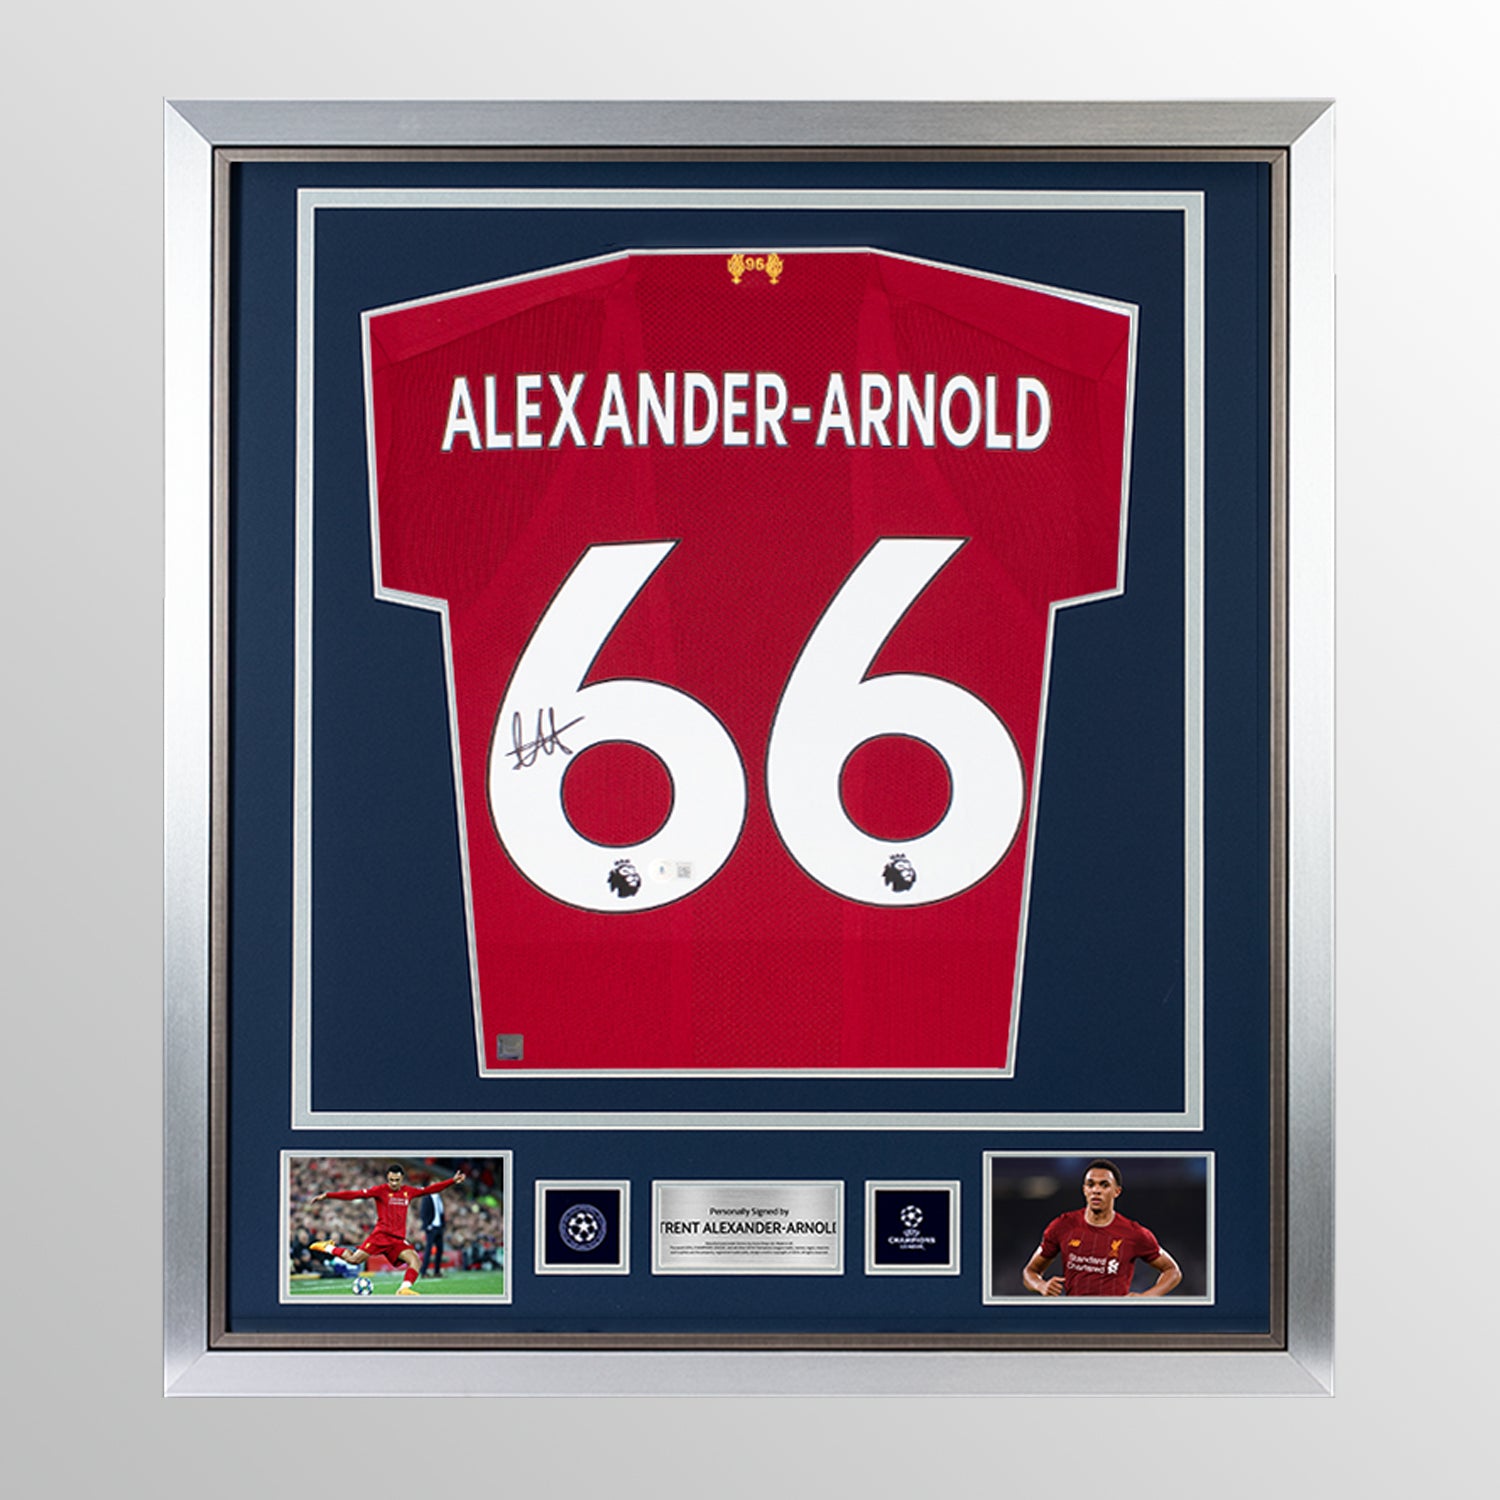 Trent Alexander-Arnold Official UEFA Champions League Back Signed and Hero Framed Liverpool FC 2019-20 Home Shirt UEFA Club Competitions Online Store